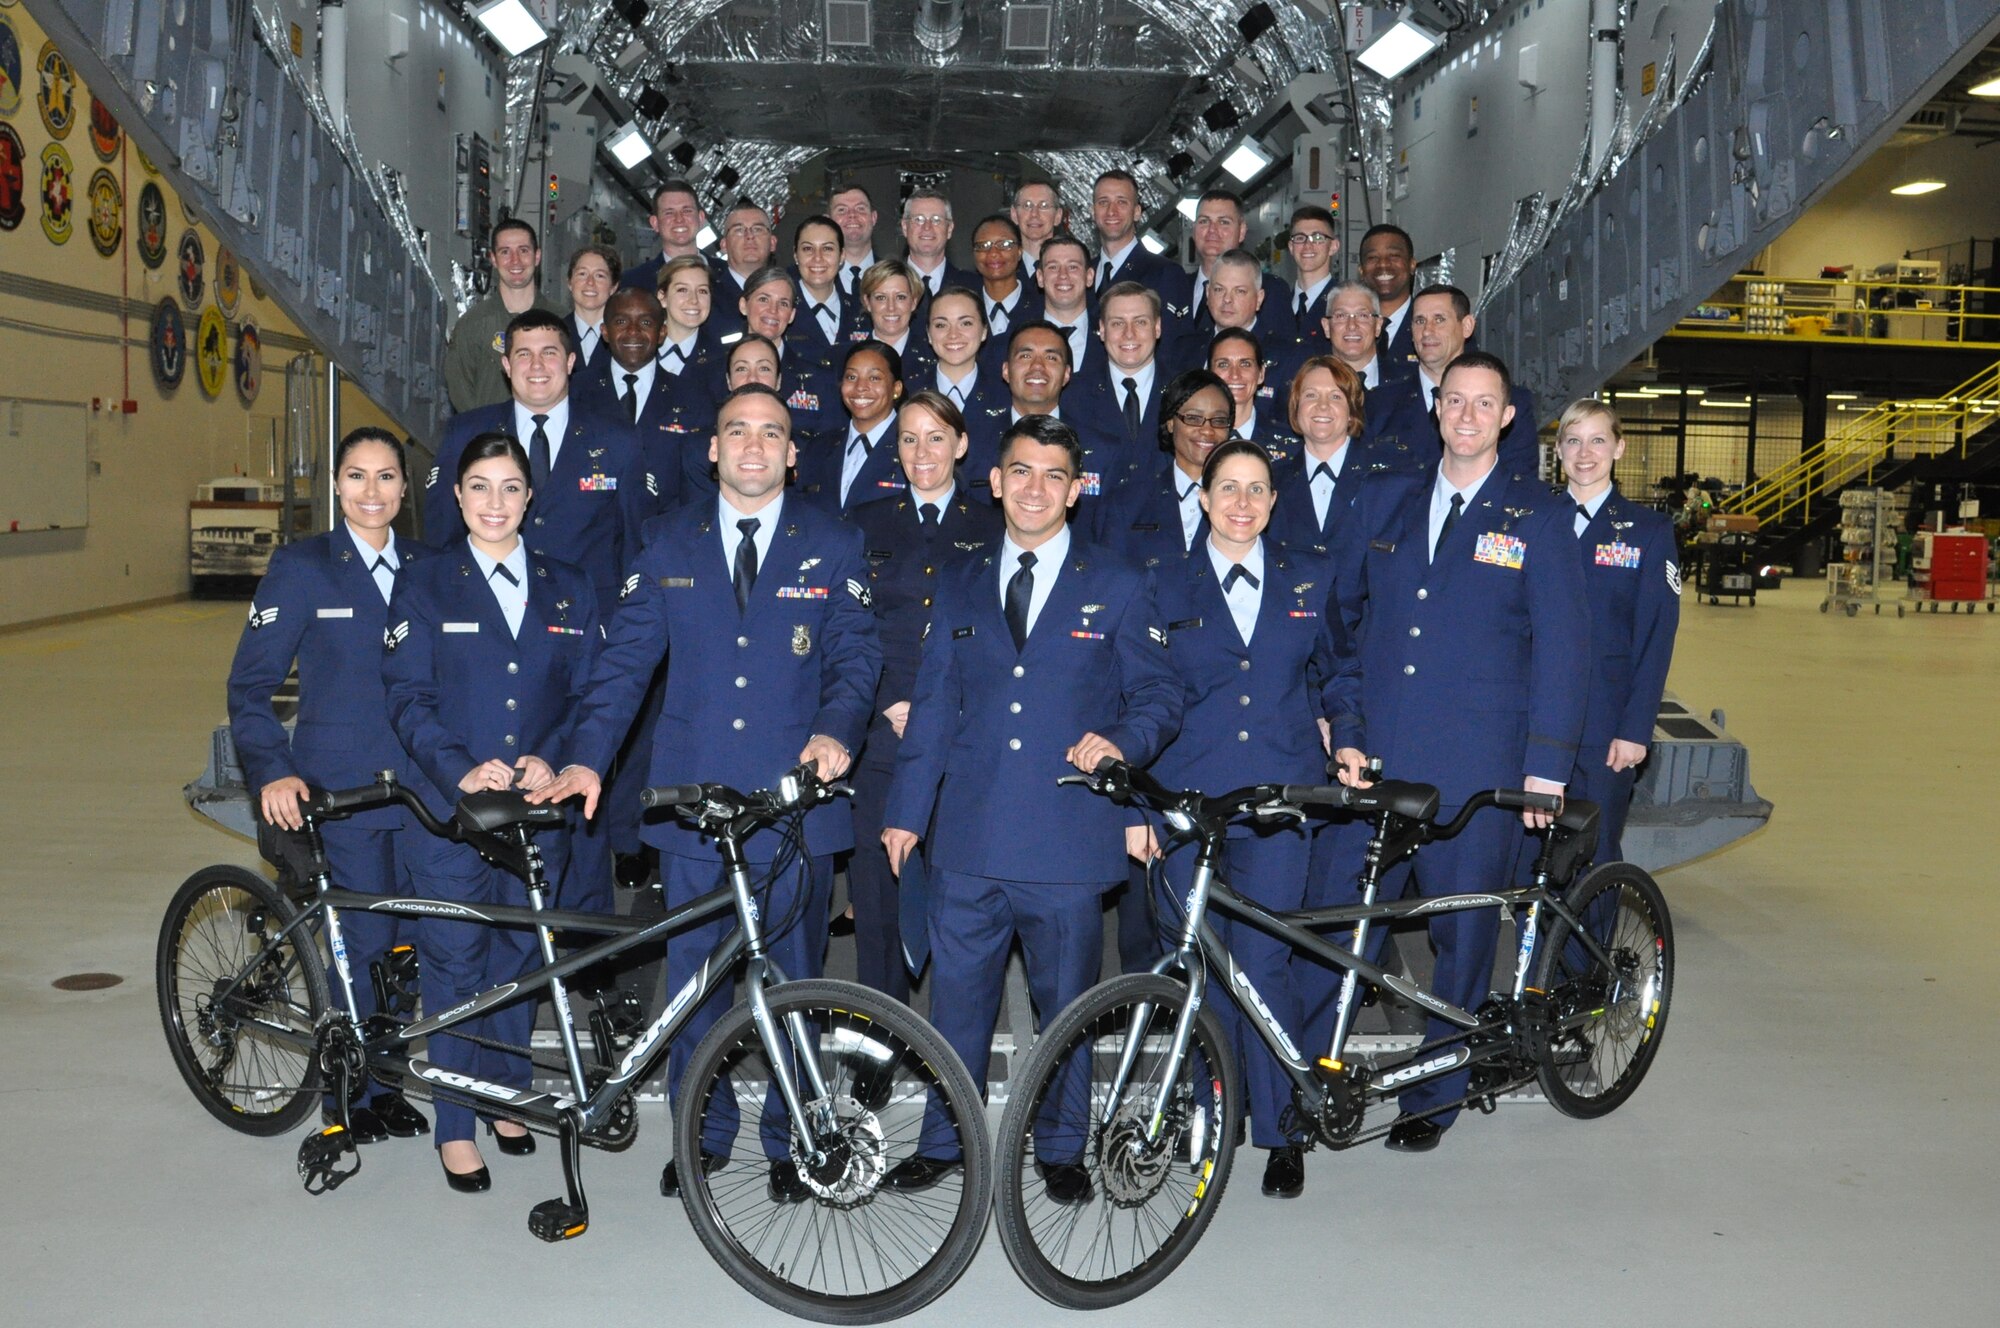 Students from the United States Air Force School of Aerospace Medicine Flight Nurse and Aeromedical Evacuation Technician Course, Class 2016D shown with two tandem bicycles the class donated to the Ohio State School for the Blind. Twenty-nine students graduated with the class. One of the bikes will be donated on behalf of and in honor of the USAFSAM cadre. The second bike will be donated in honor of two students in the class who unexpectedly lost family members during the time the class was in session. (U.S. Air Force photo/Bryan Ripple)